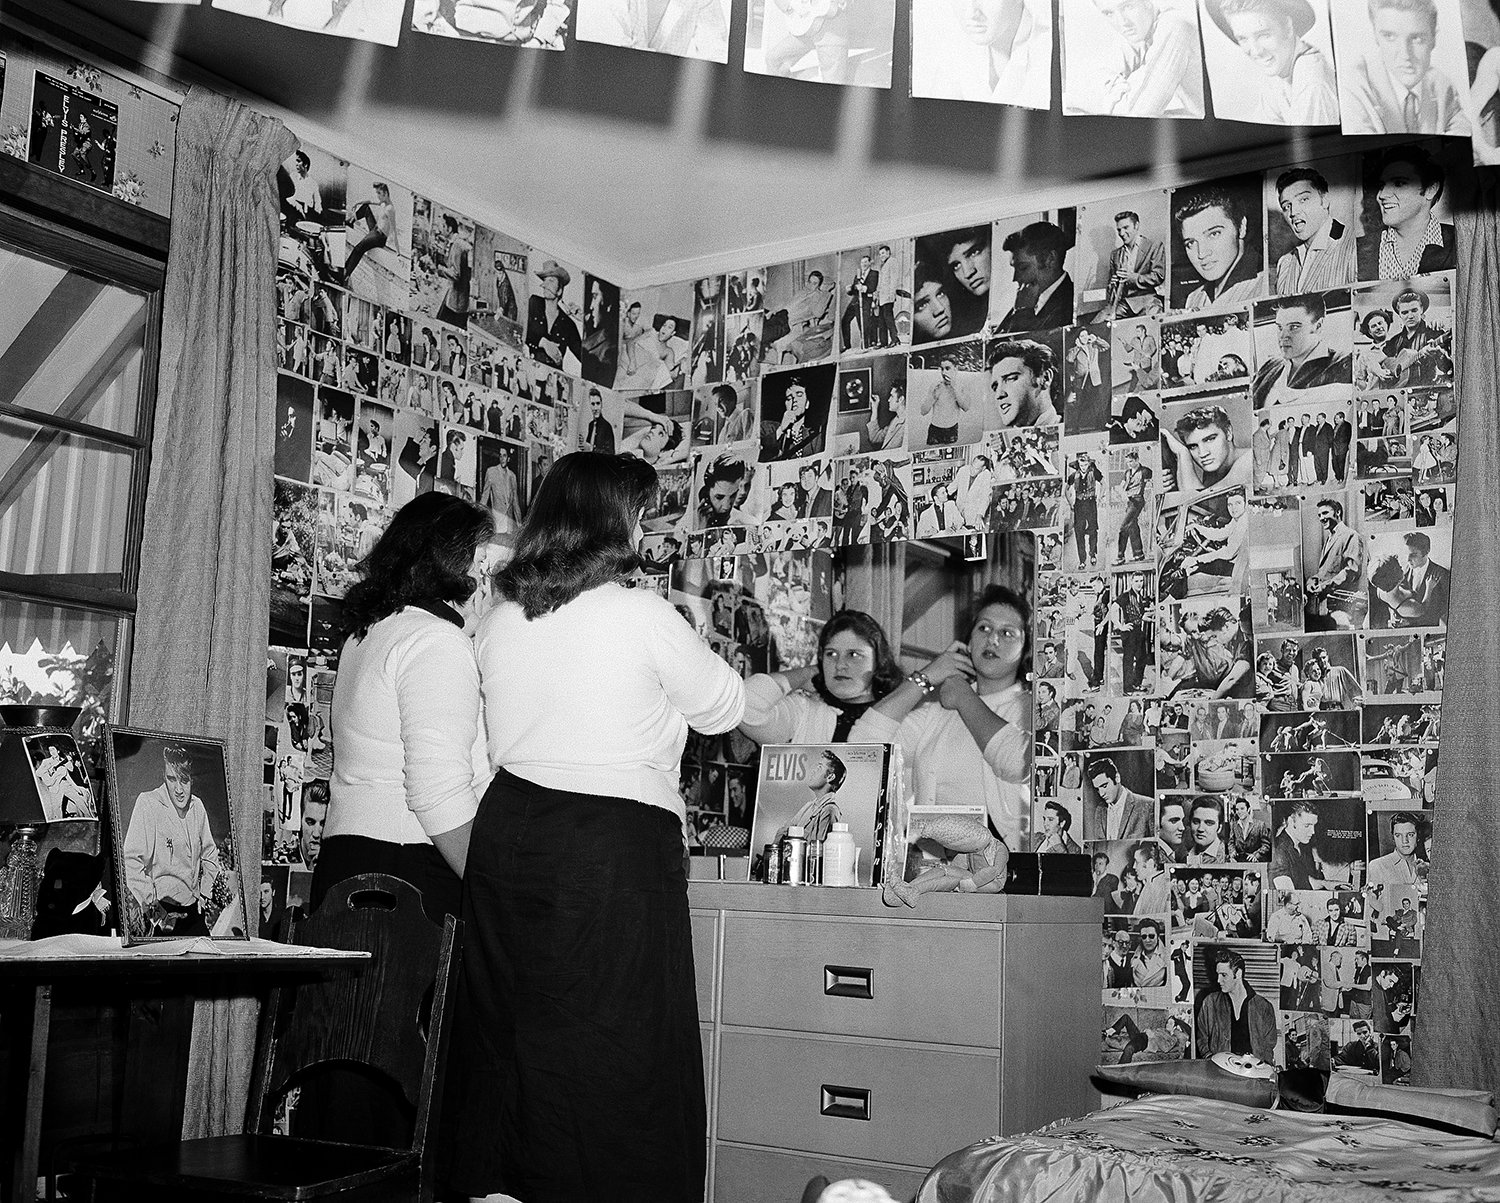  Surrounded by pictures of Elvis Presley, Oralee Davolt, 15, left, and her sister Sharyn, 14, primp at the mirror in their bedroom in Memphis, Tenn., on April 15, 1957. The girls have collected 1,087 pictures of Elvis, as well as Elvis neckties, hats